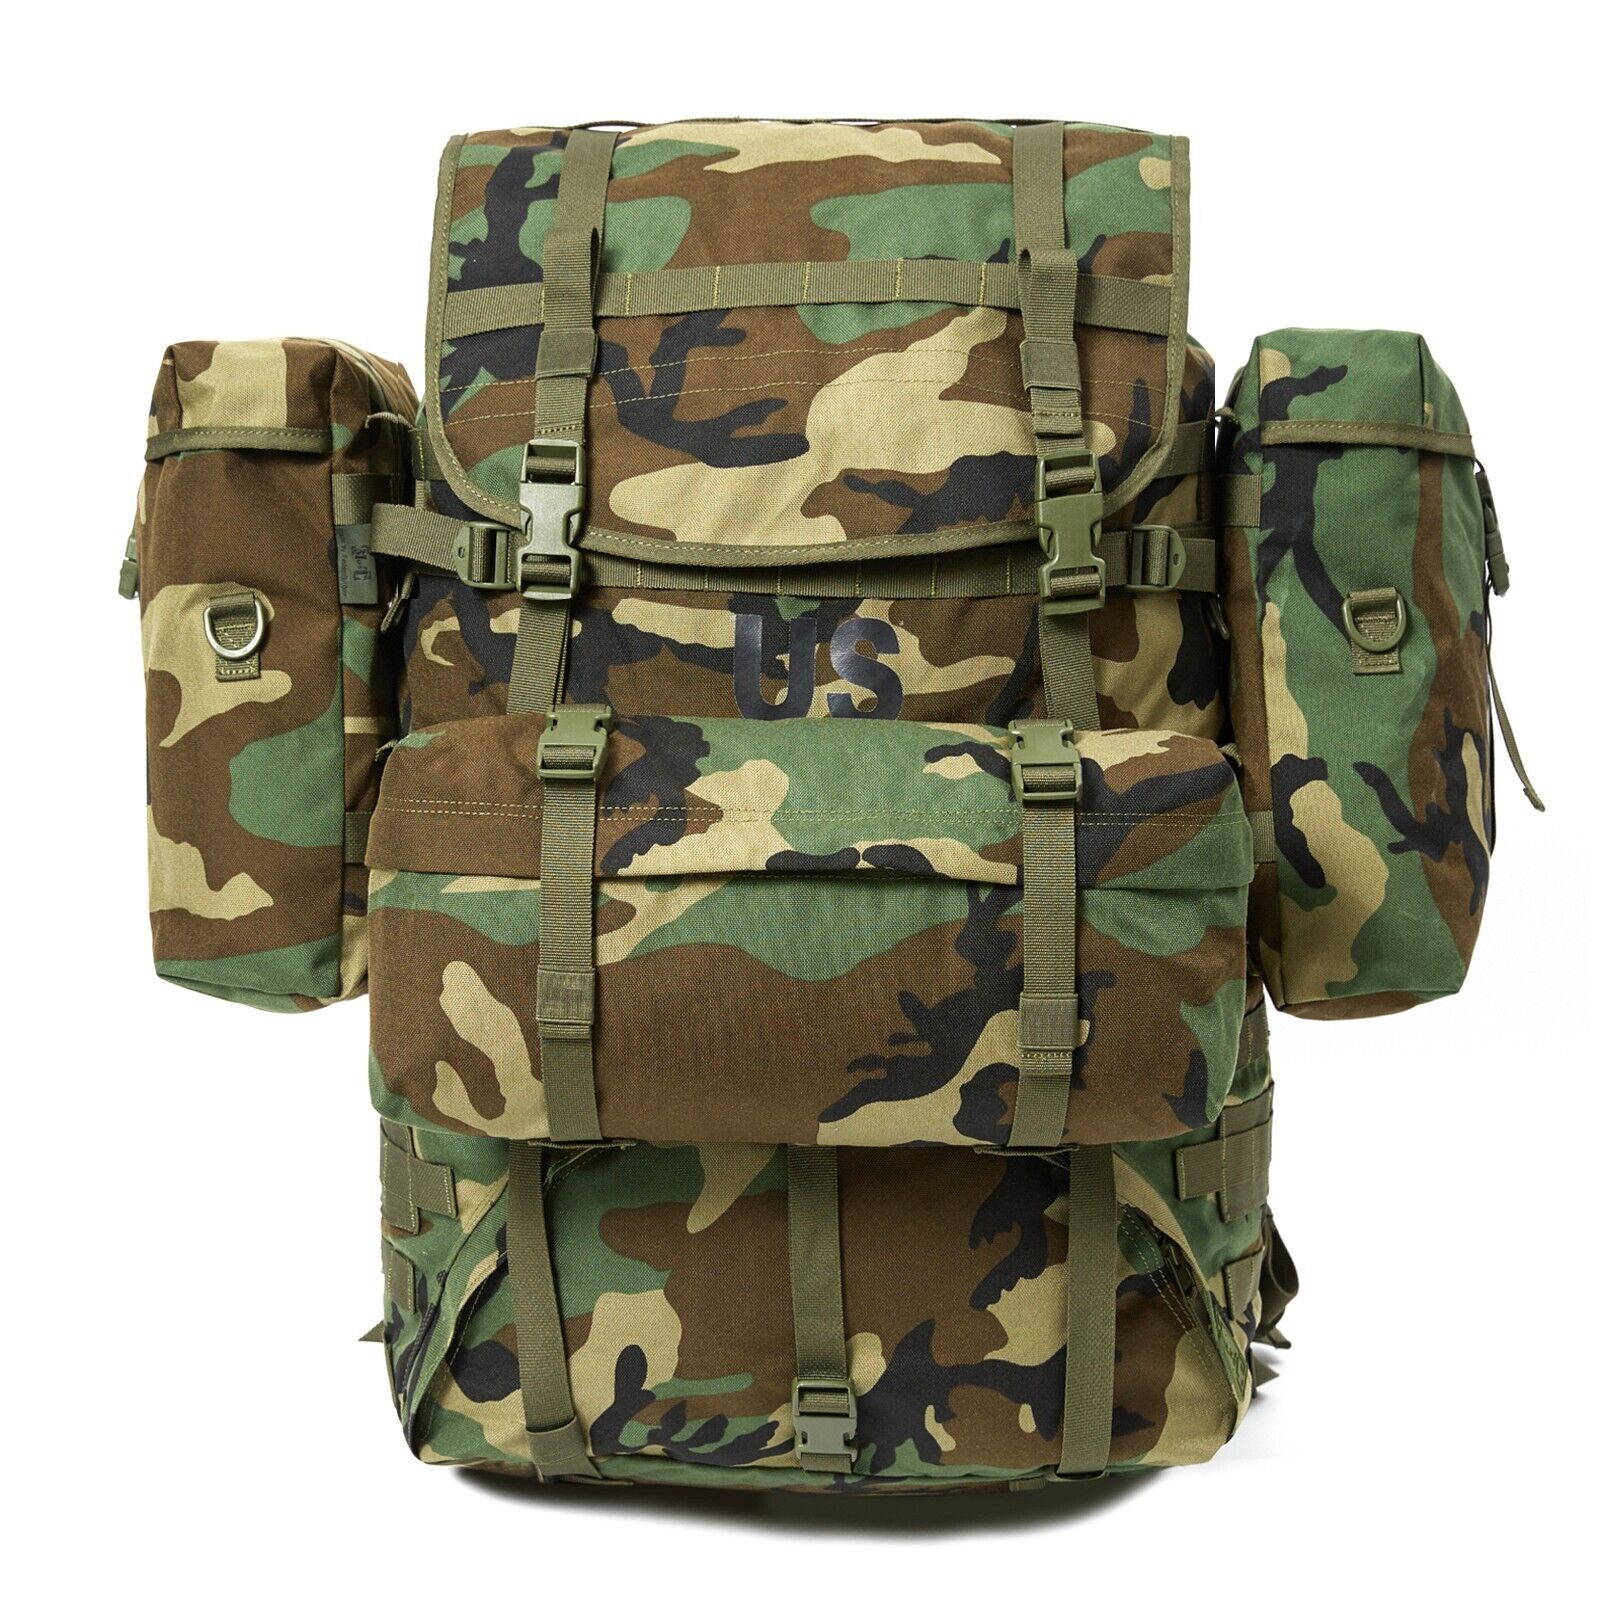 MT Military MOLLE 2 Large Rucksack with Frame, Army Tactical Backpack - Woodland